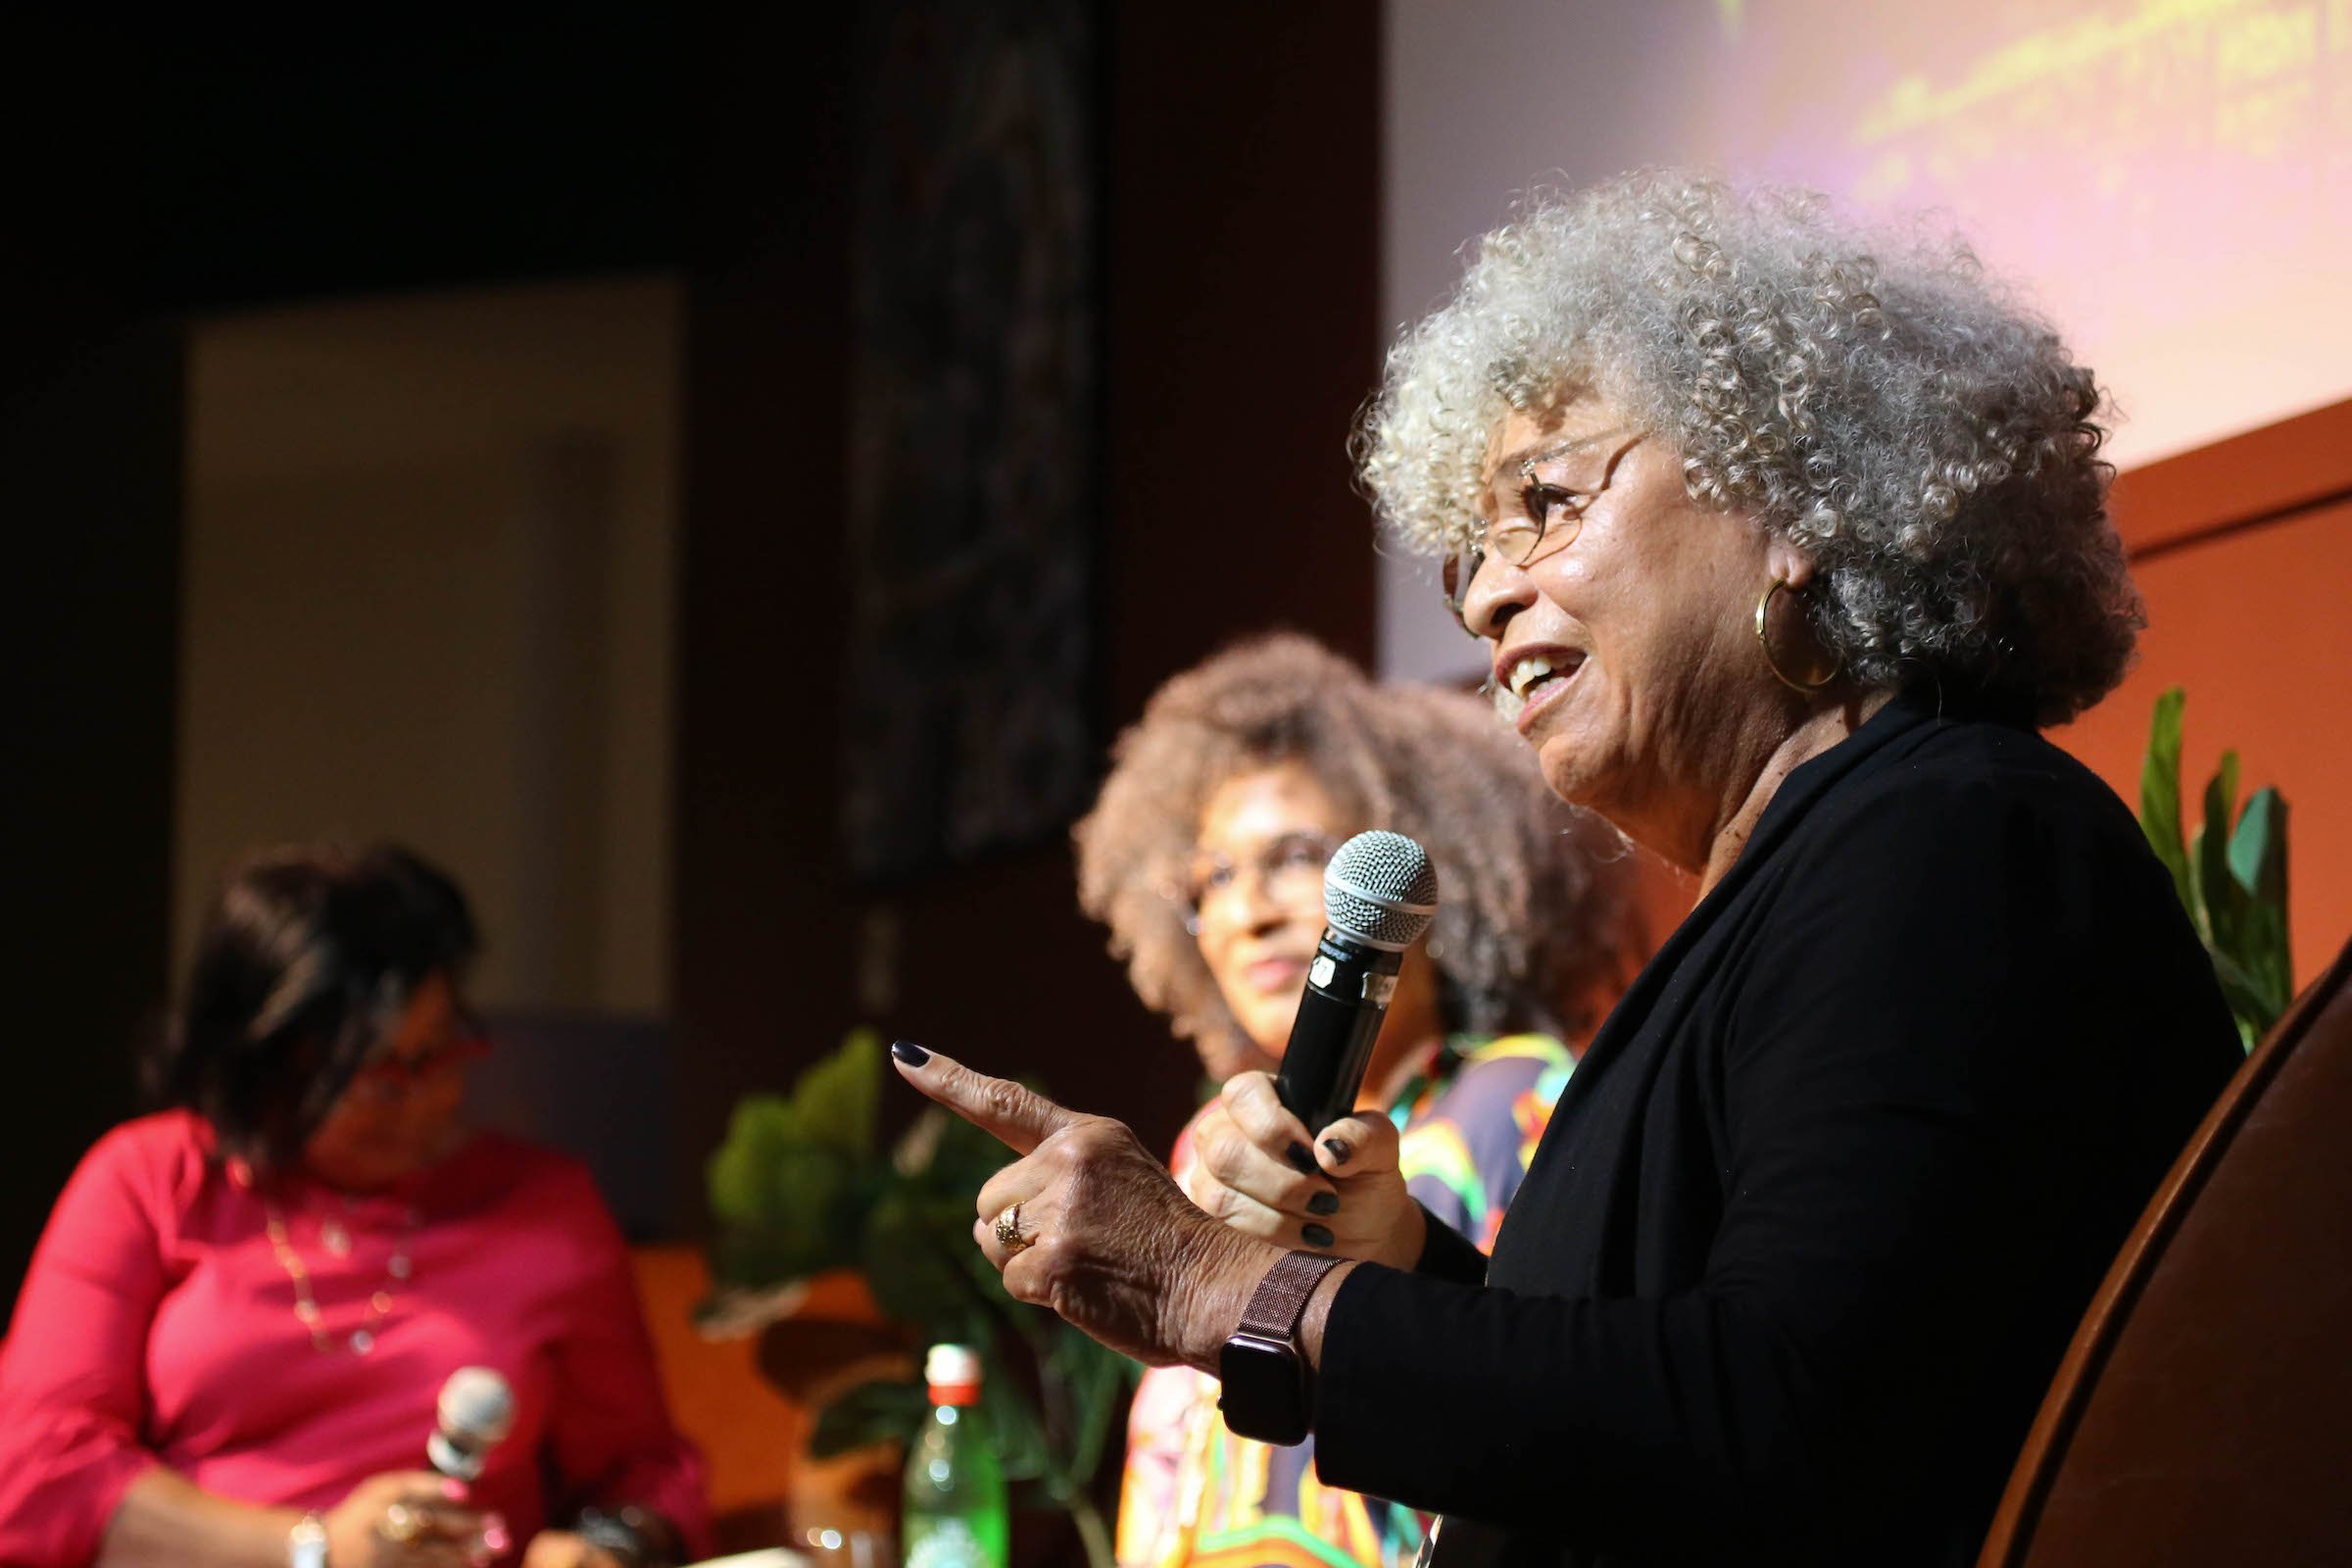 Angela Davis delivers remarks onstage during the Busboys And Poets 7th Anniversary Special Event at Busboys And Poets Columbia on September 07, 2022 in Columbia, Maryland.